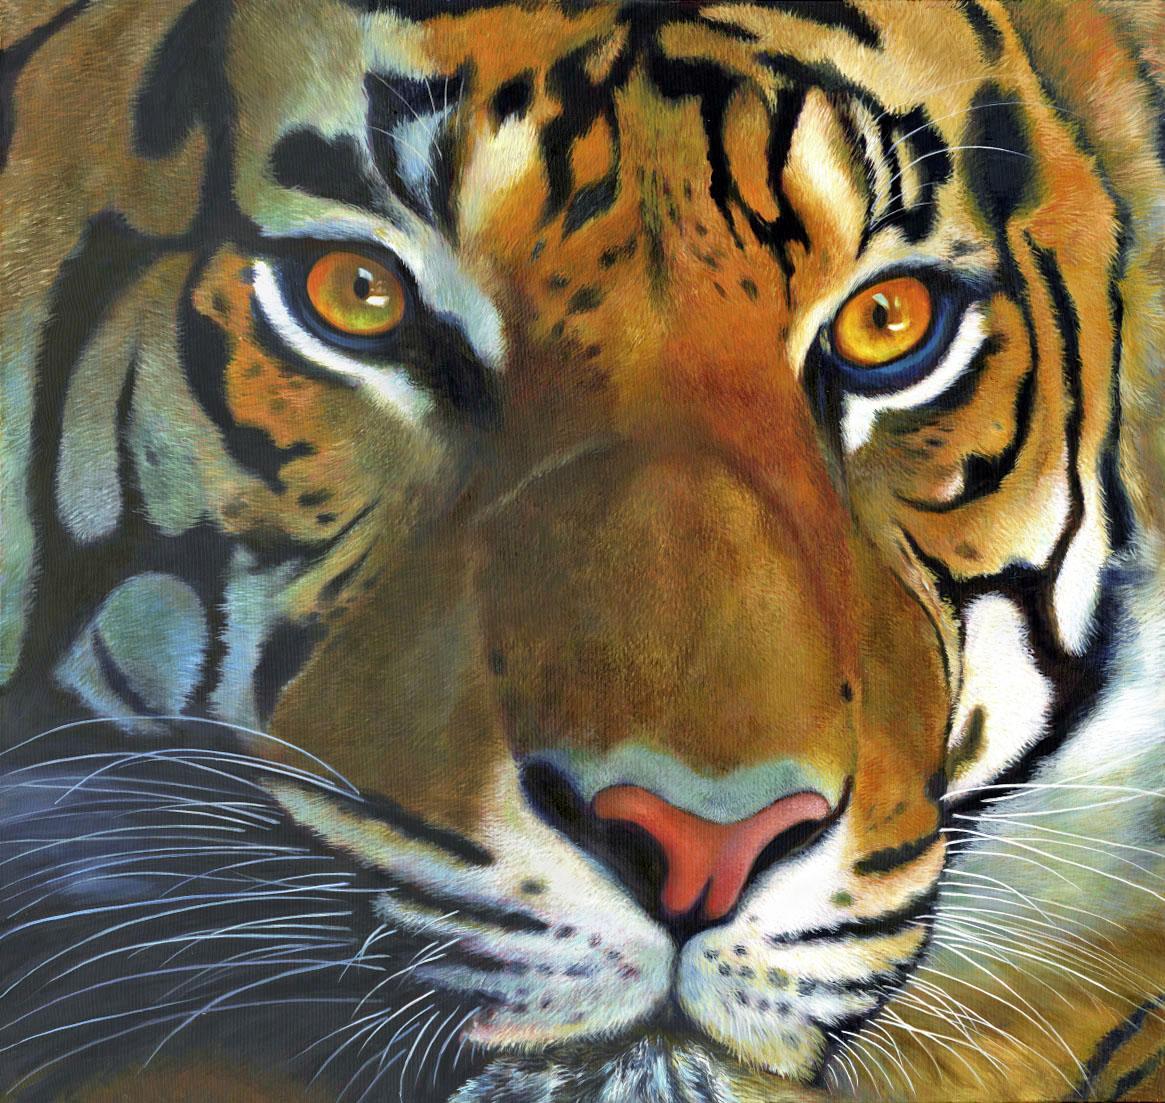 Tiger II-original modern photo realism wildlife oil painting-contemporary Art - Painting by Fabriano